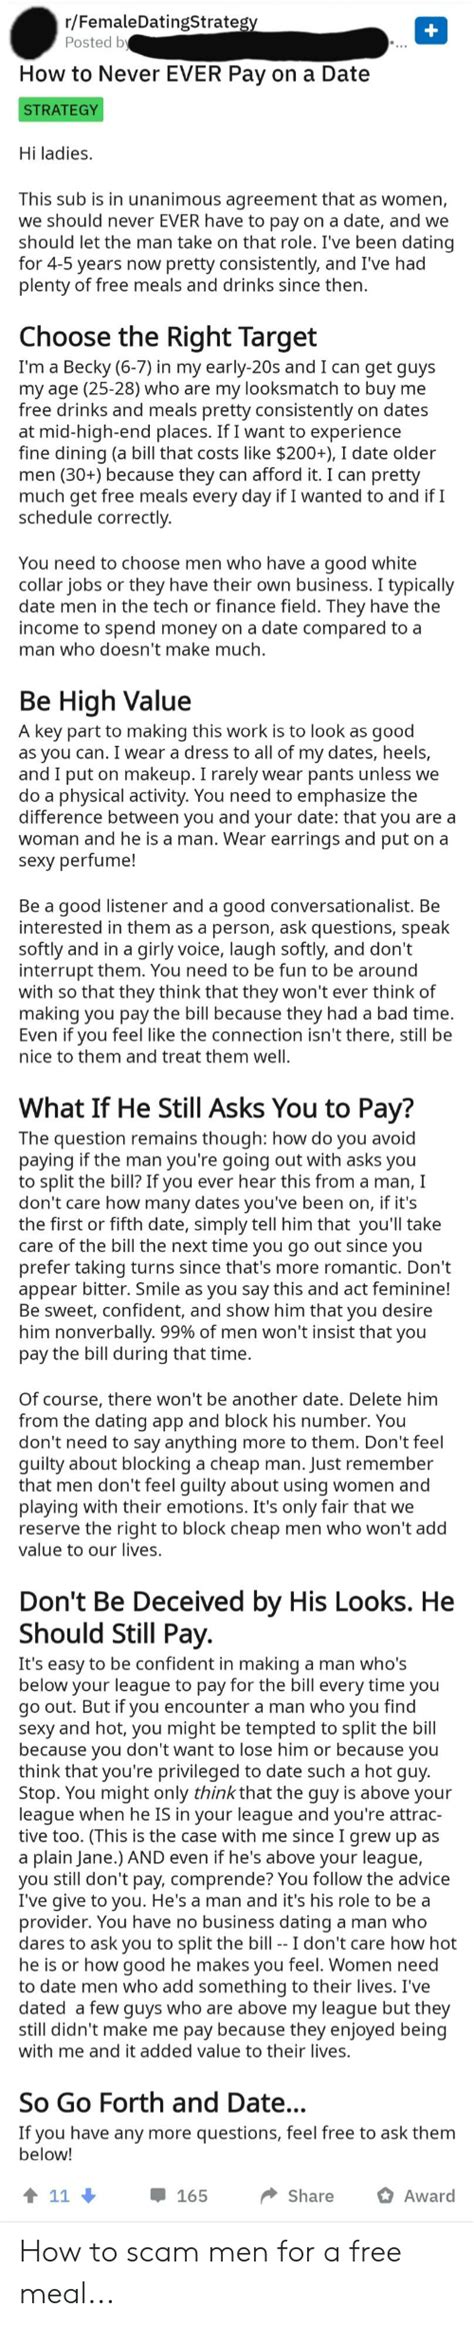 rfemaledatingstrategy posted by how to never ever pay on a